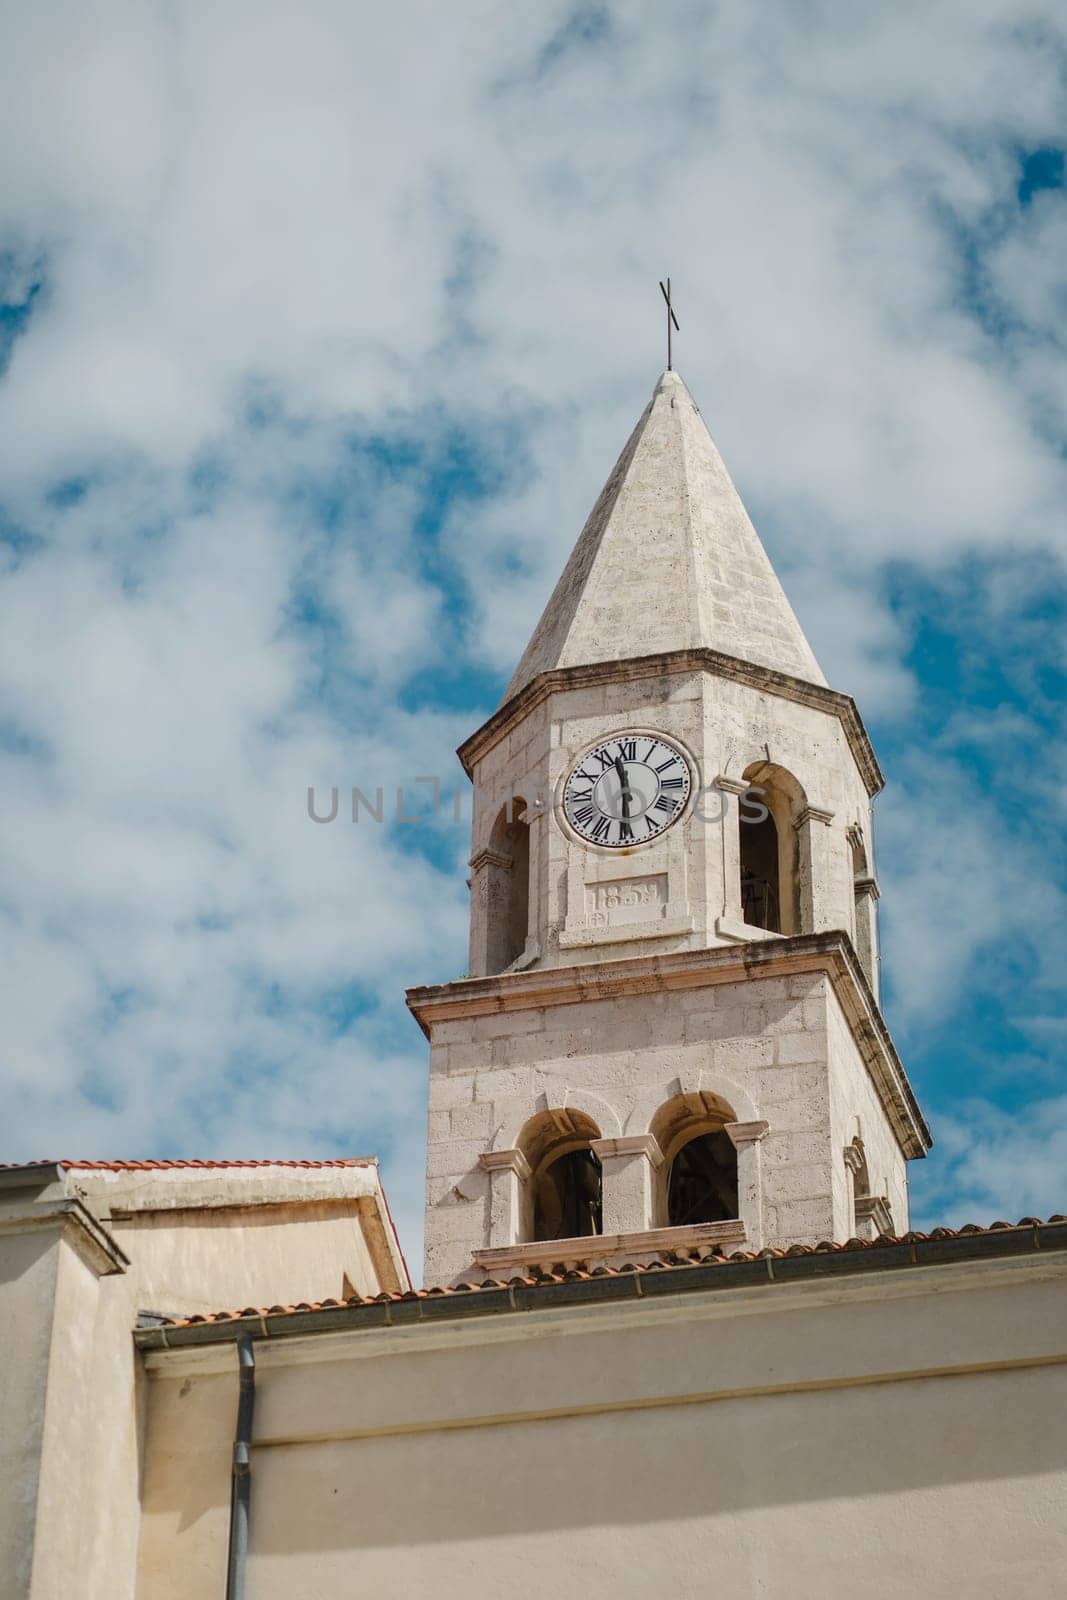 Ancient tower with vintage clock dial in Biograd na Moru of Croatia by Popov